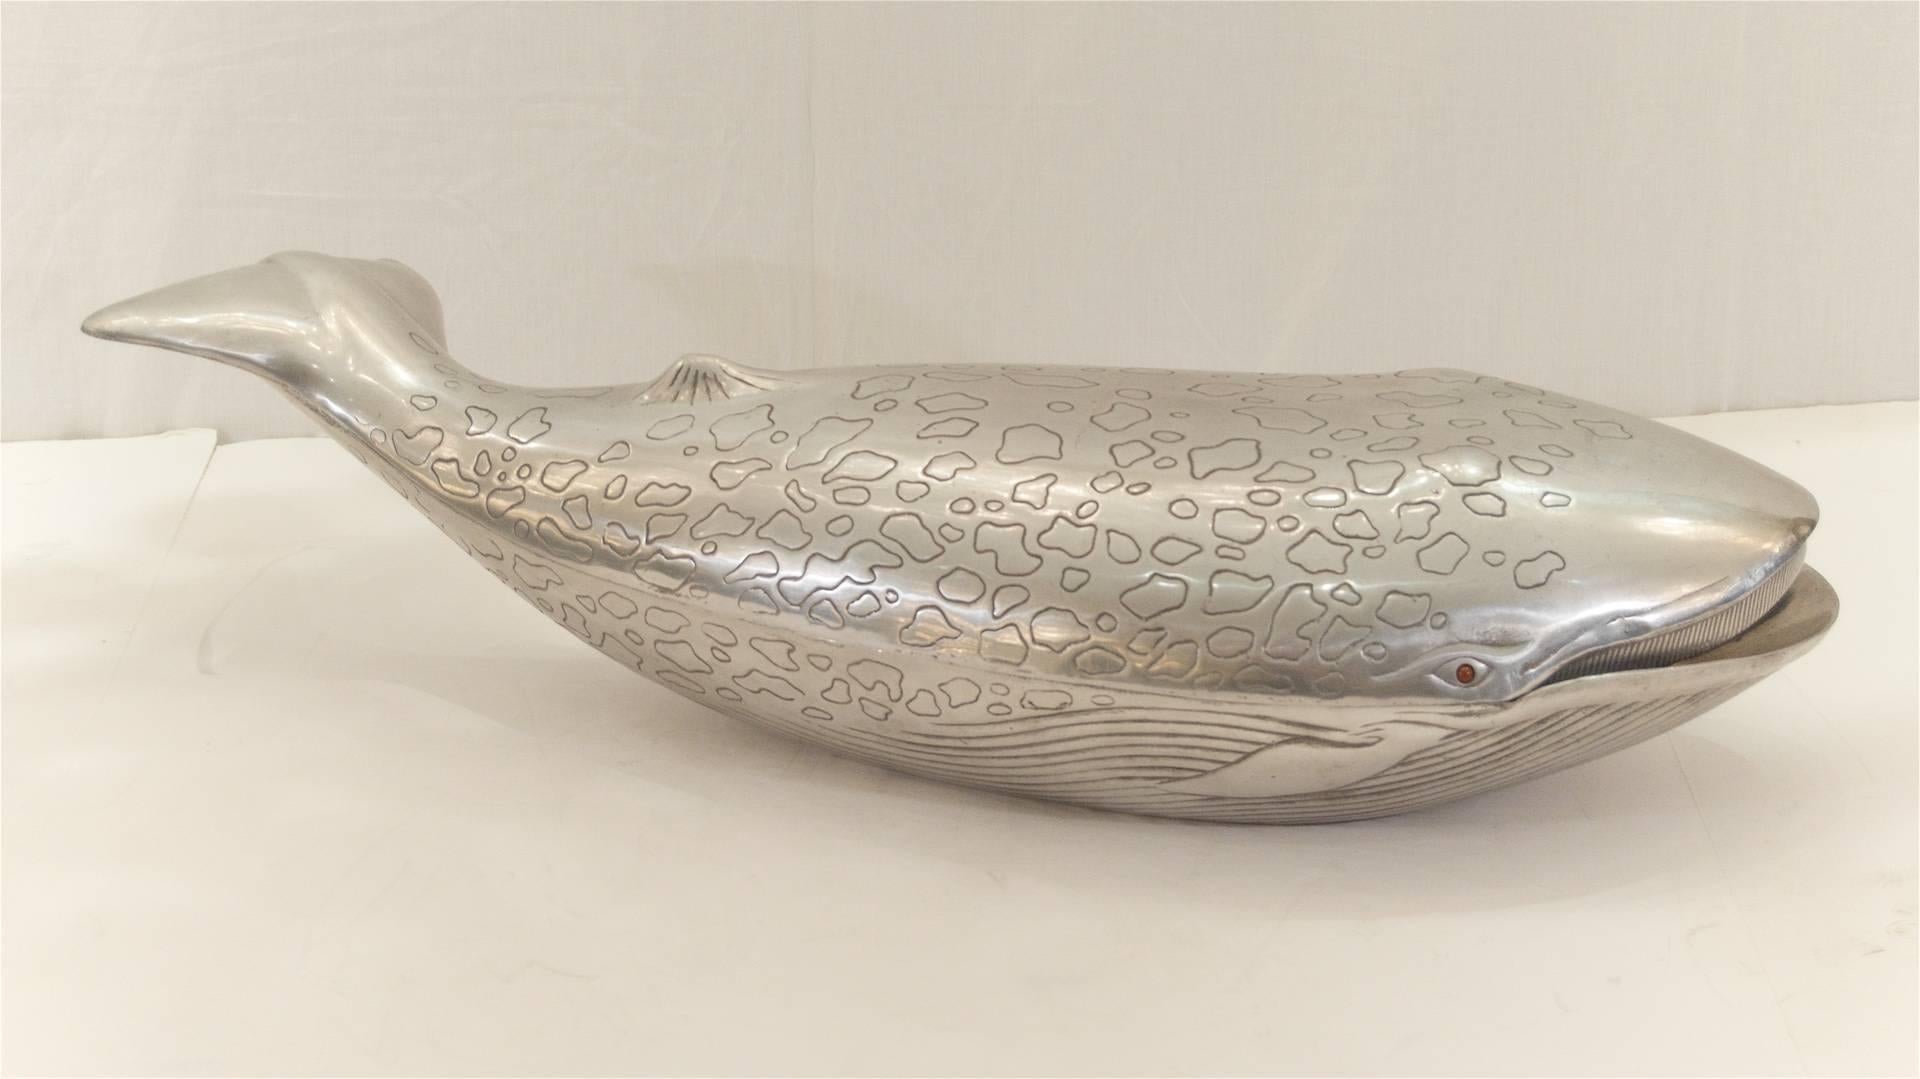 American Decorative Whale Bowl or Centrepiece